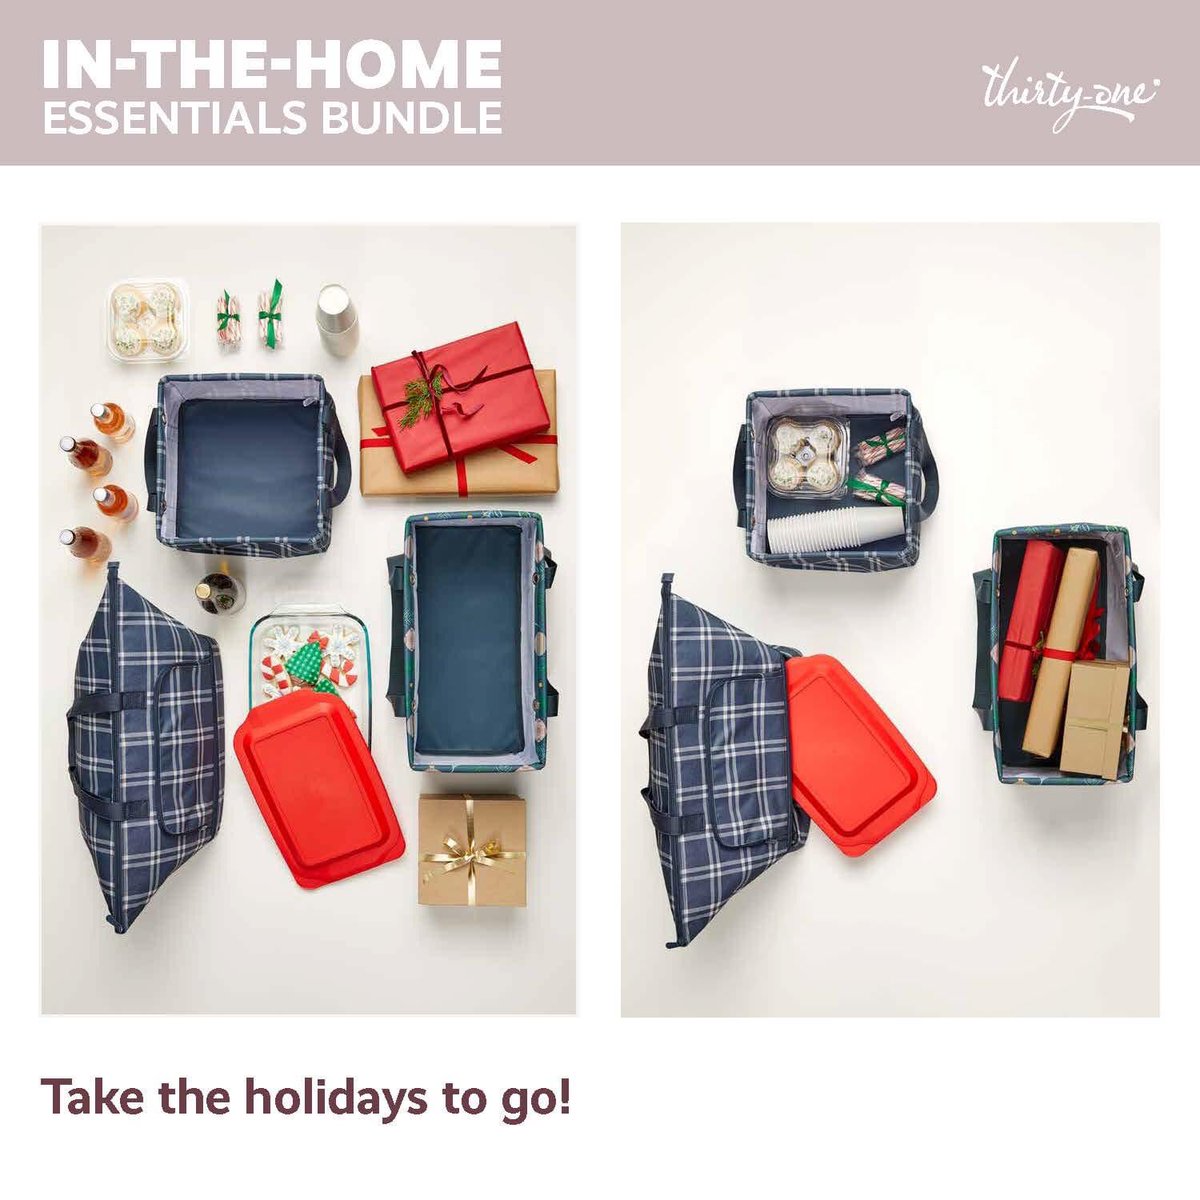 On-the-Go and In-the-Home Essentials Bundle are here!!!

Come back later to check them out.

#EssentialBundles #HomeEssentials #OnTheGoEssentials #corbettandco0809 #thirtyone #thirtyonegifts